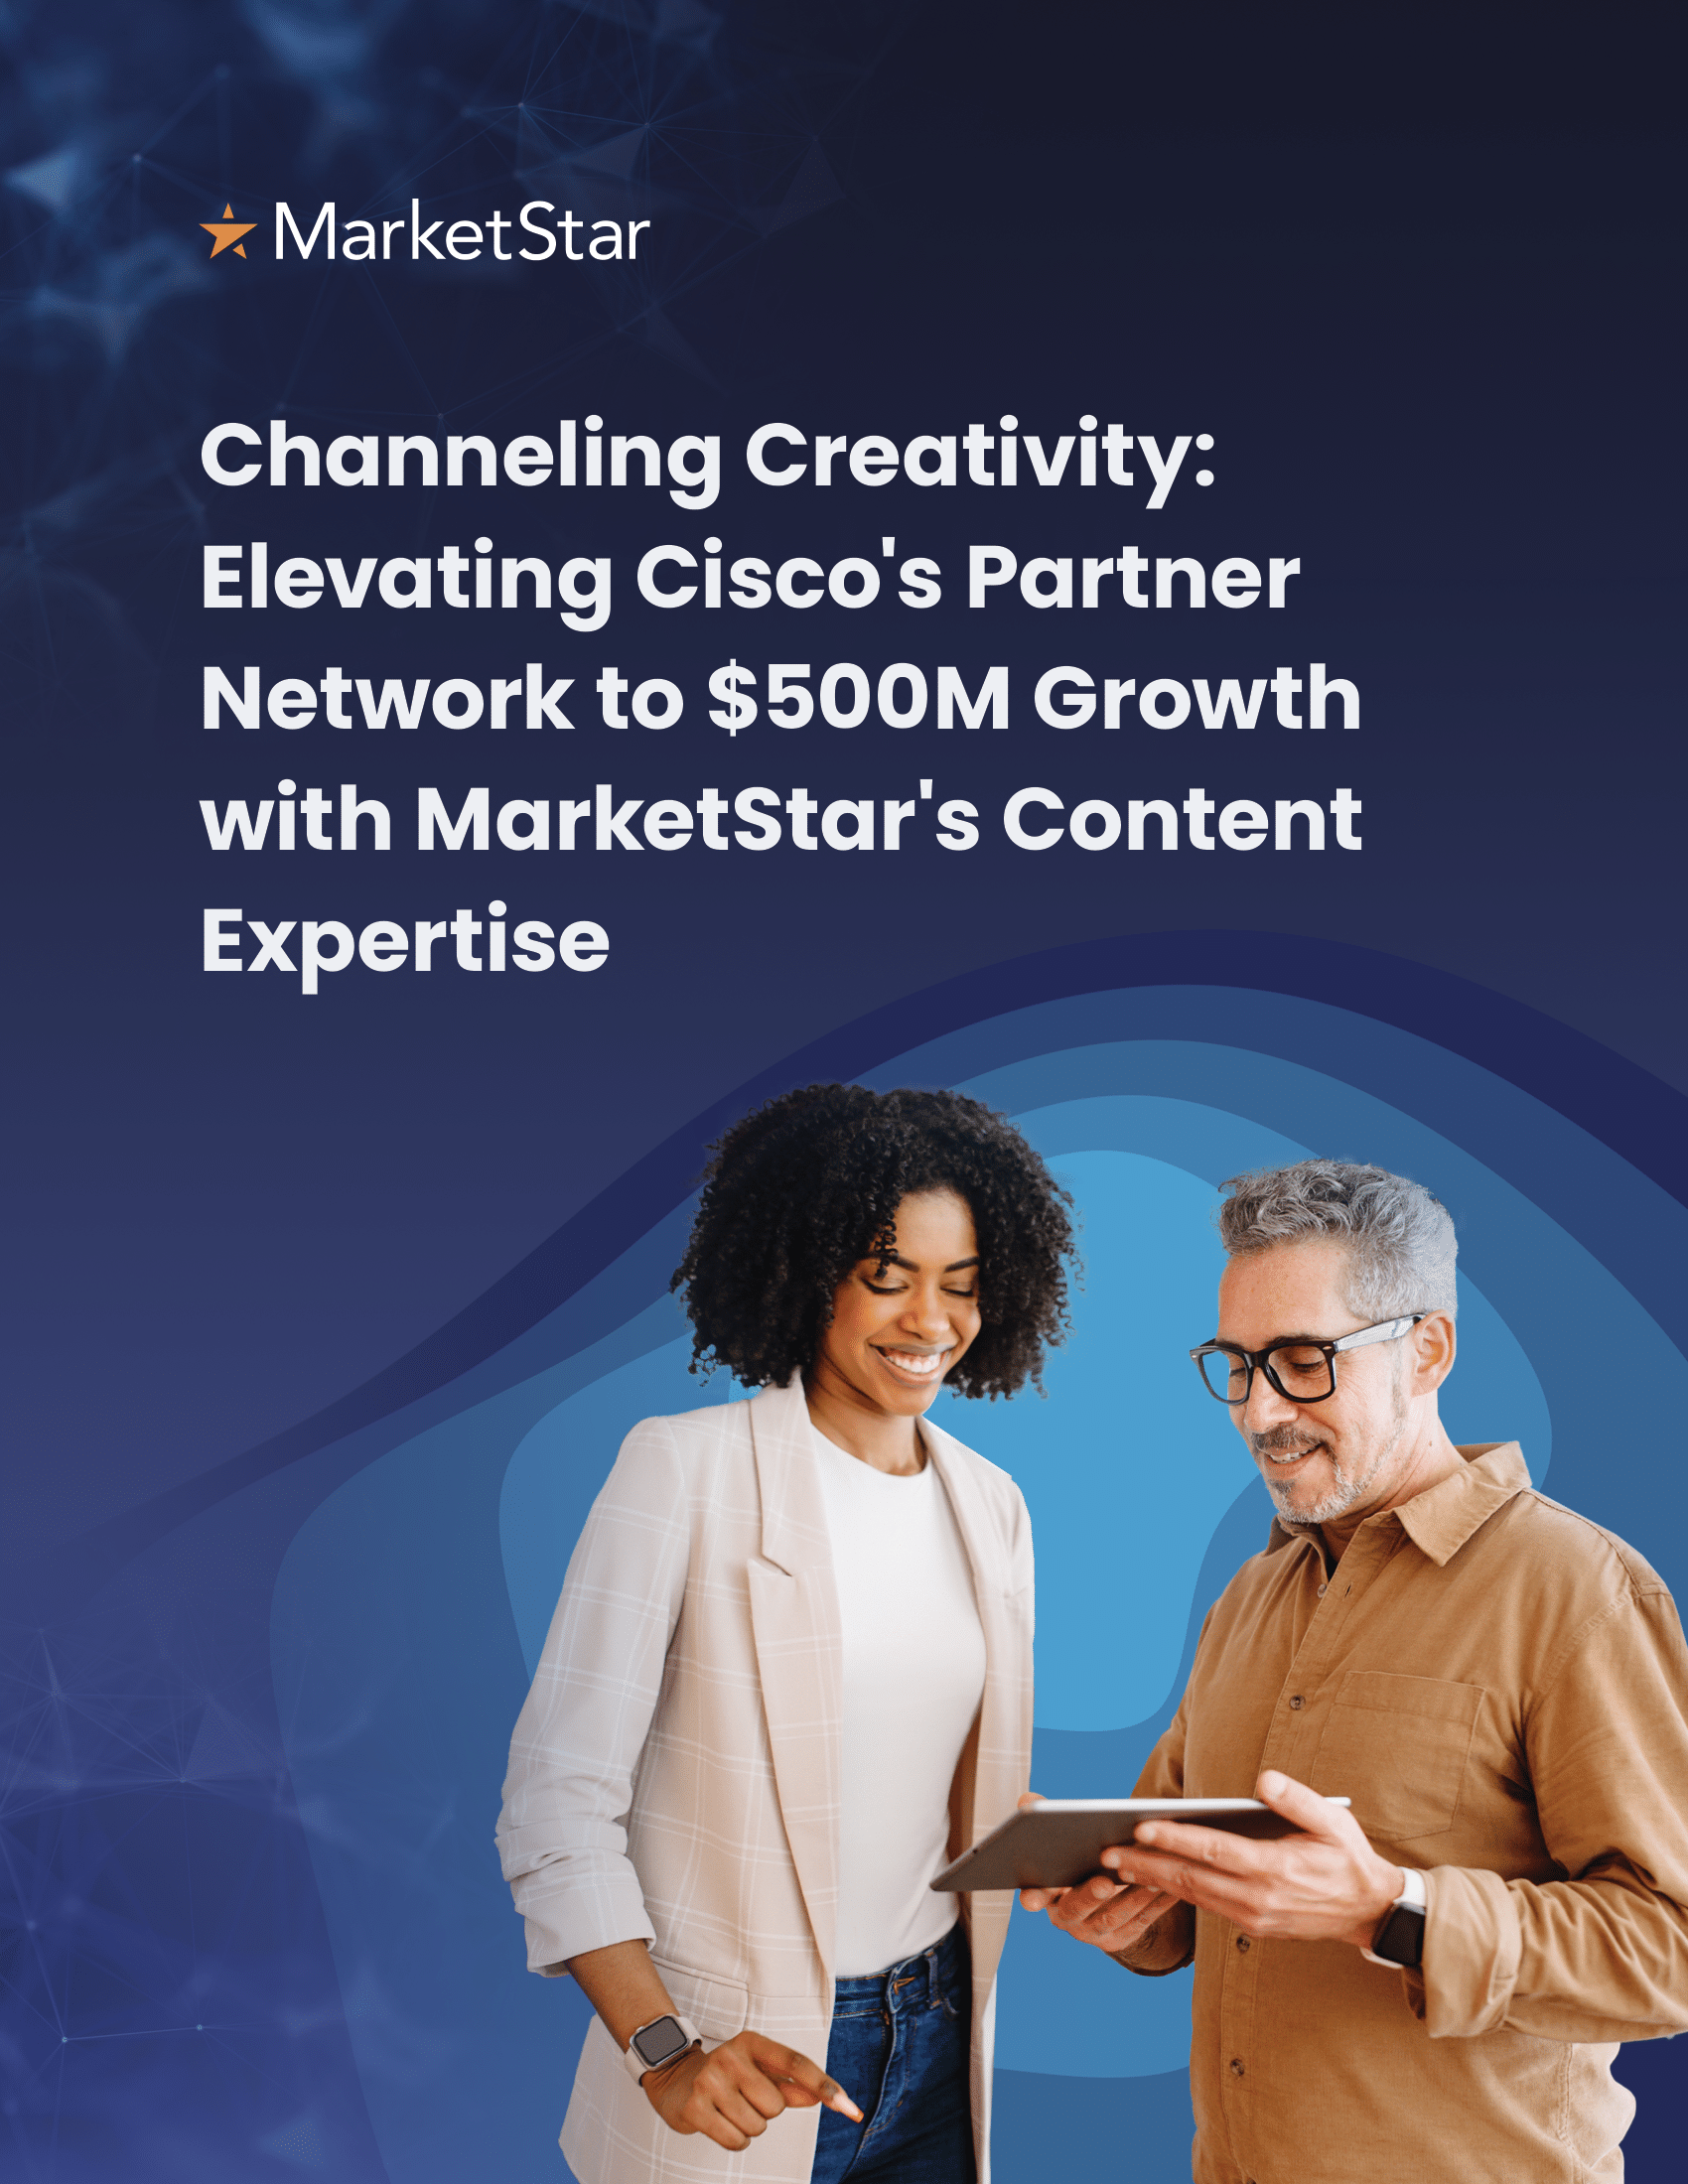 Channeling Creativity Elevating Cisco's Partner Network to $500M Growth with MarketStar's Content Expertise